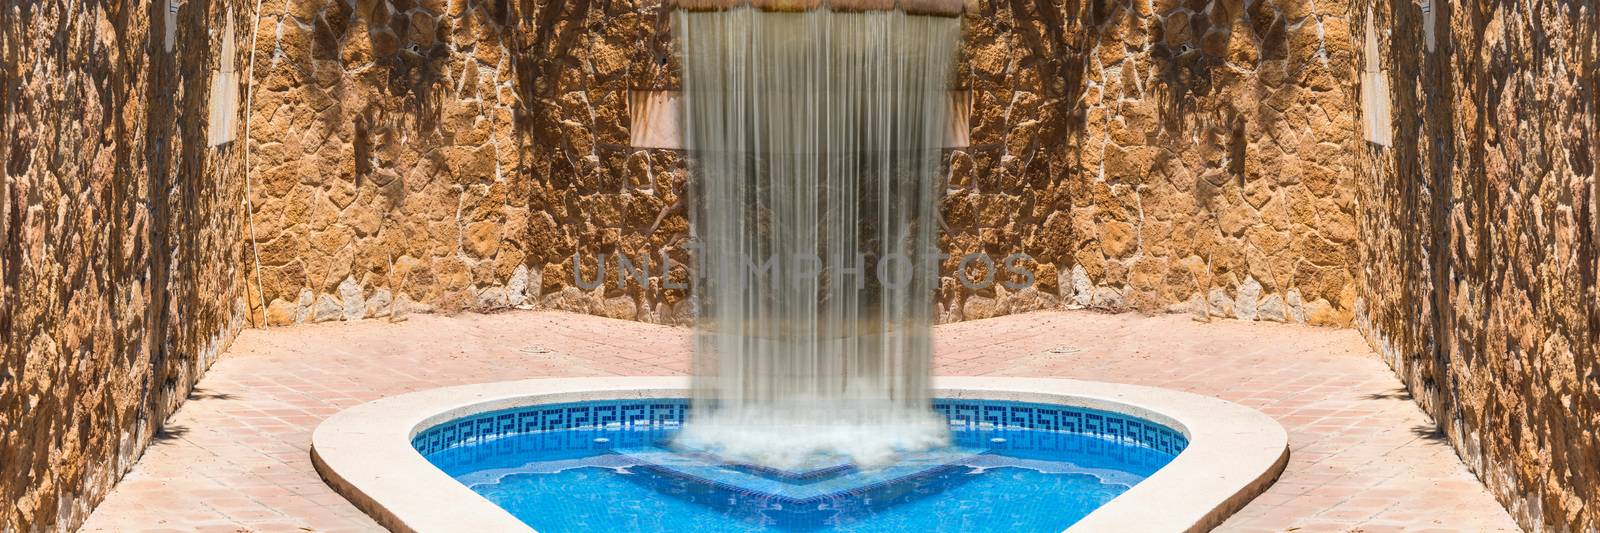 Luxury swimming pool with waterfall. In the background a mediterranean wall decorated with sandstones.